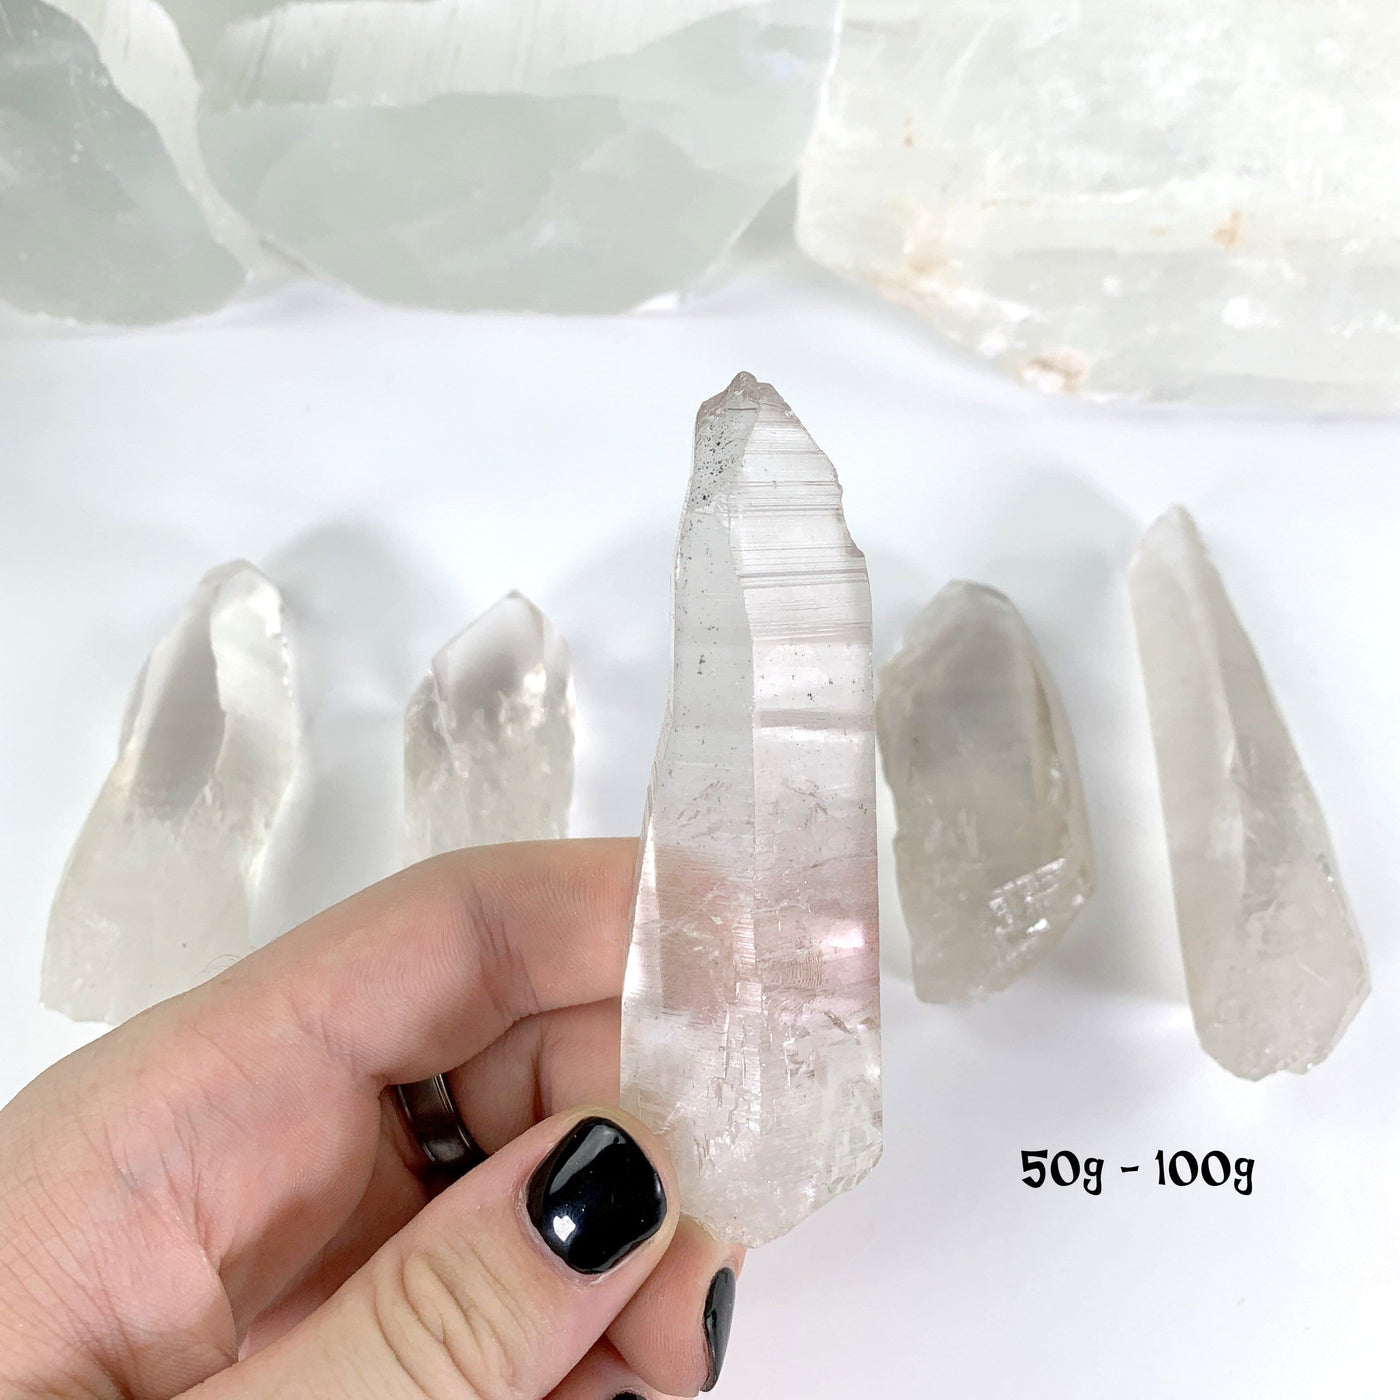 Natural Lemurian Quartz Points in weight 50g-100g in hand for size reference